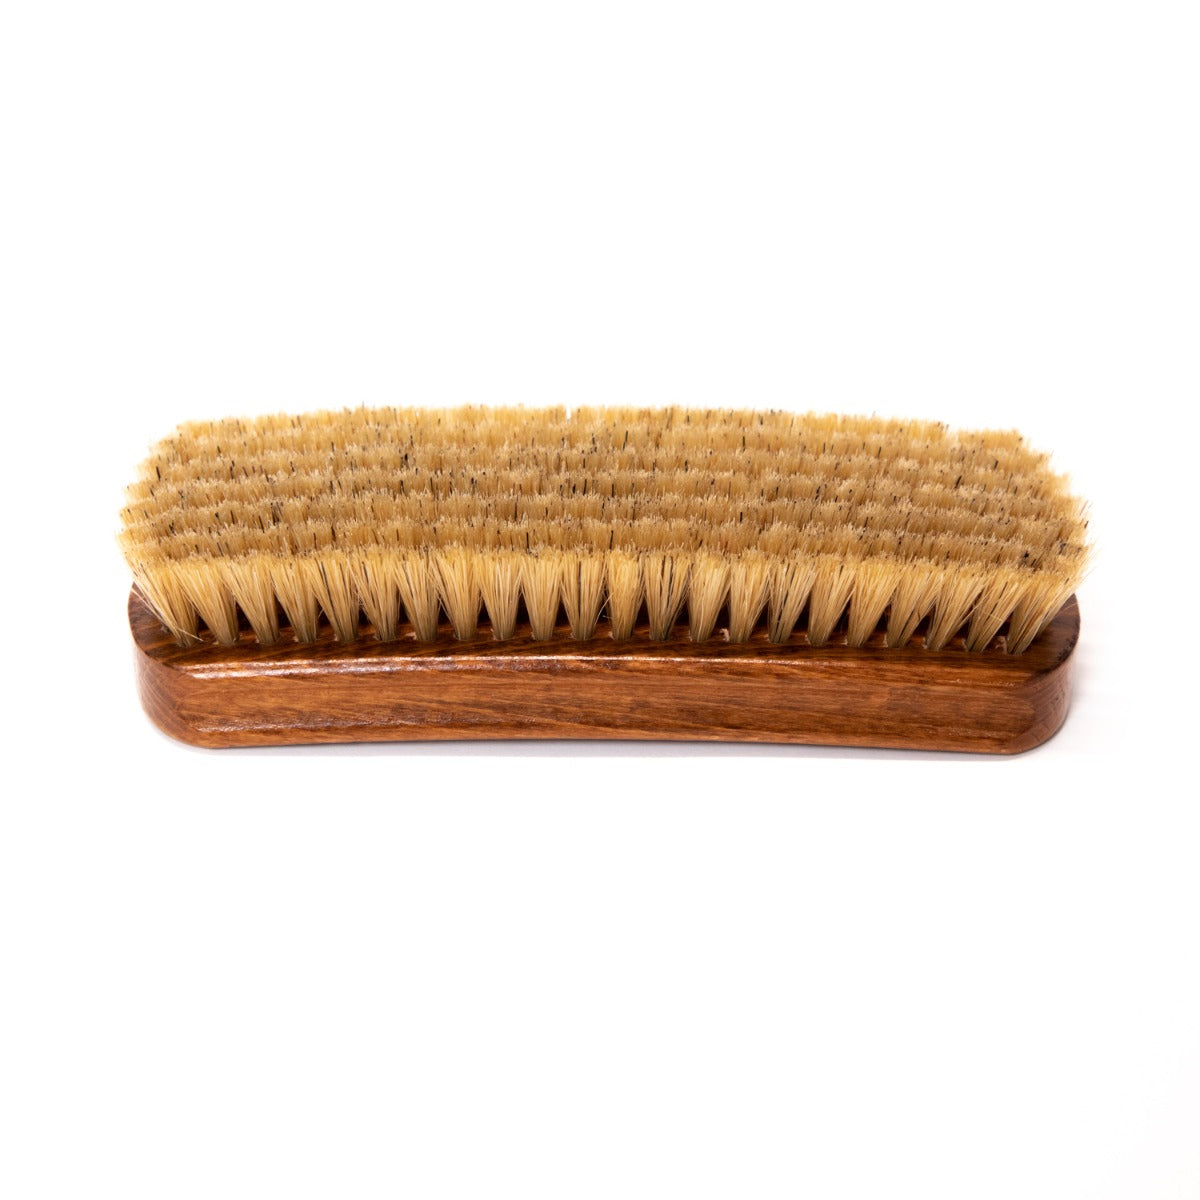 A Wellington Deluxe Pig Bristle Suede Cleaning Brush by KirbyAllison.com for cleaning suede shoes.